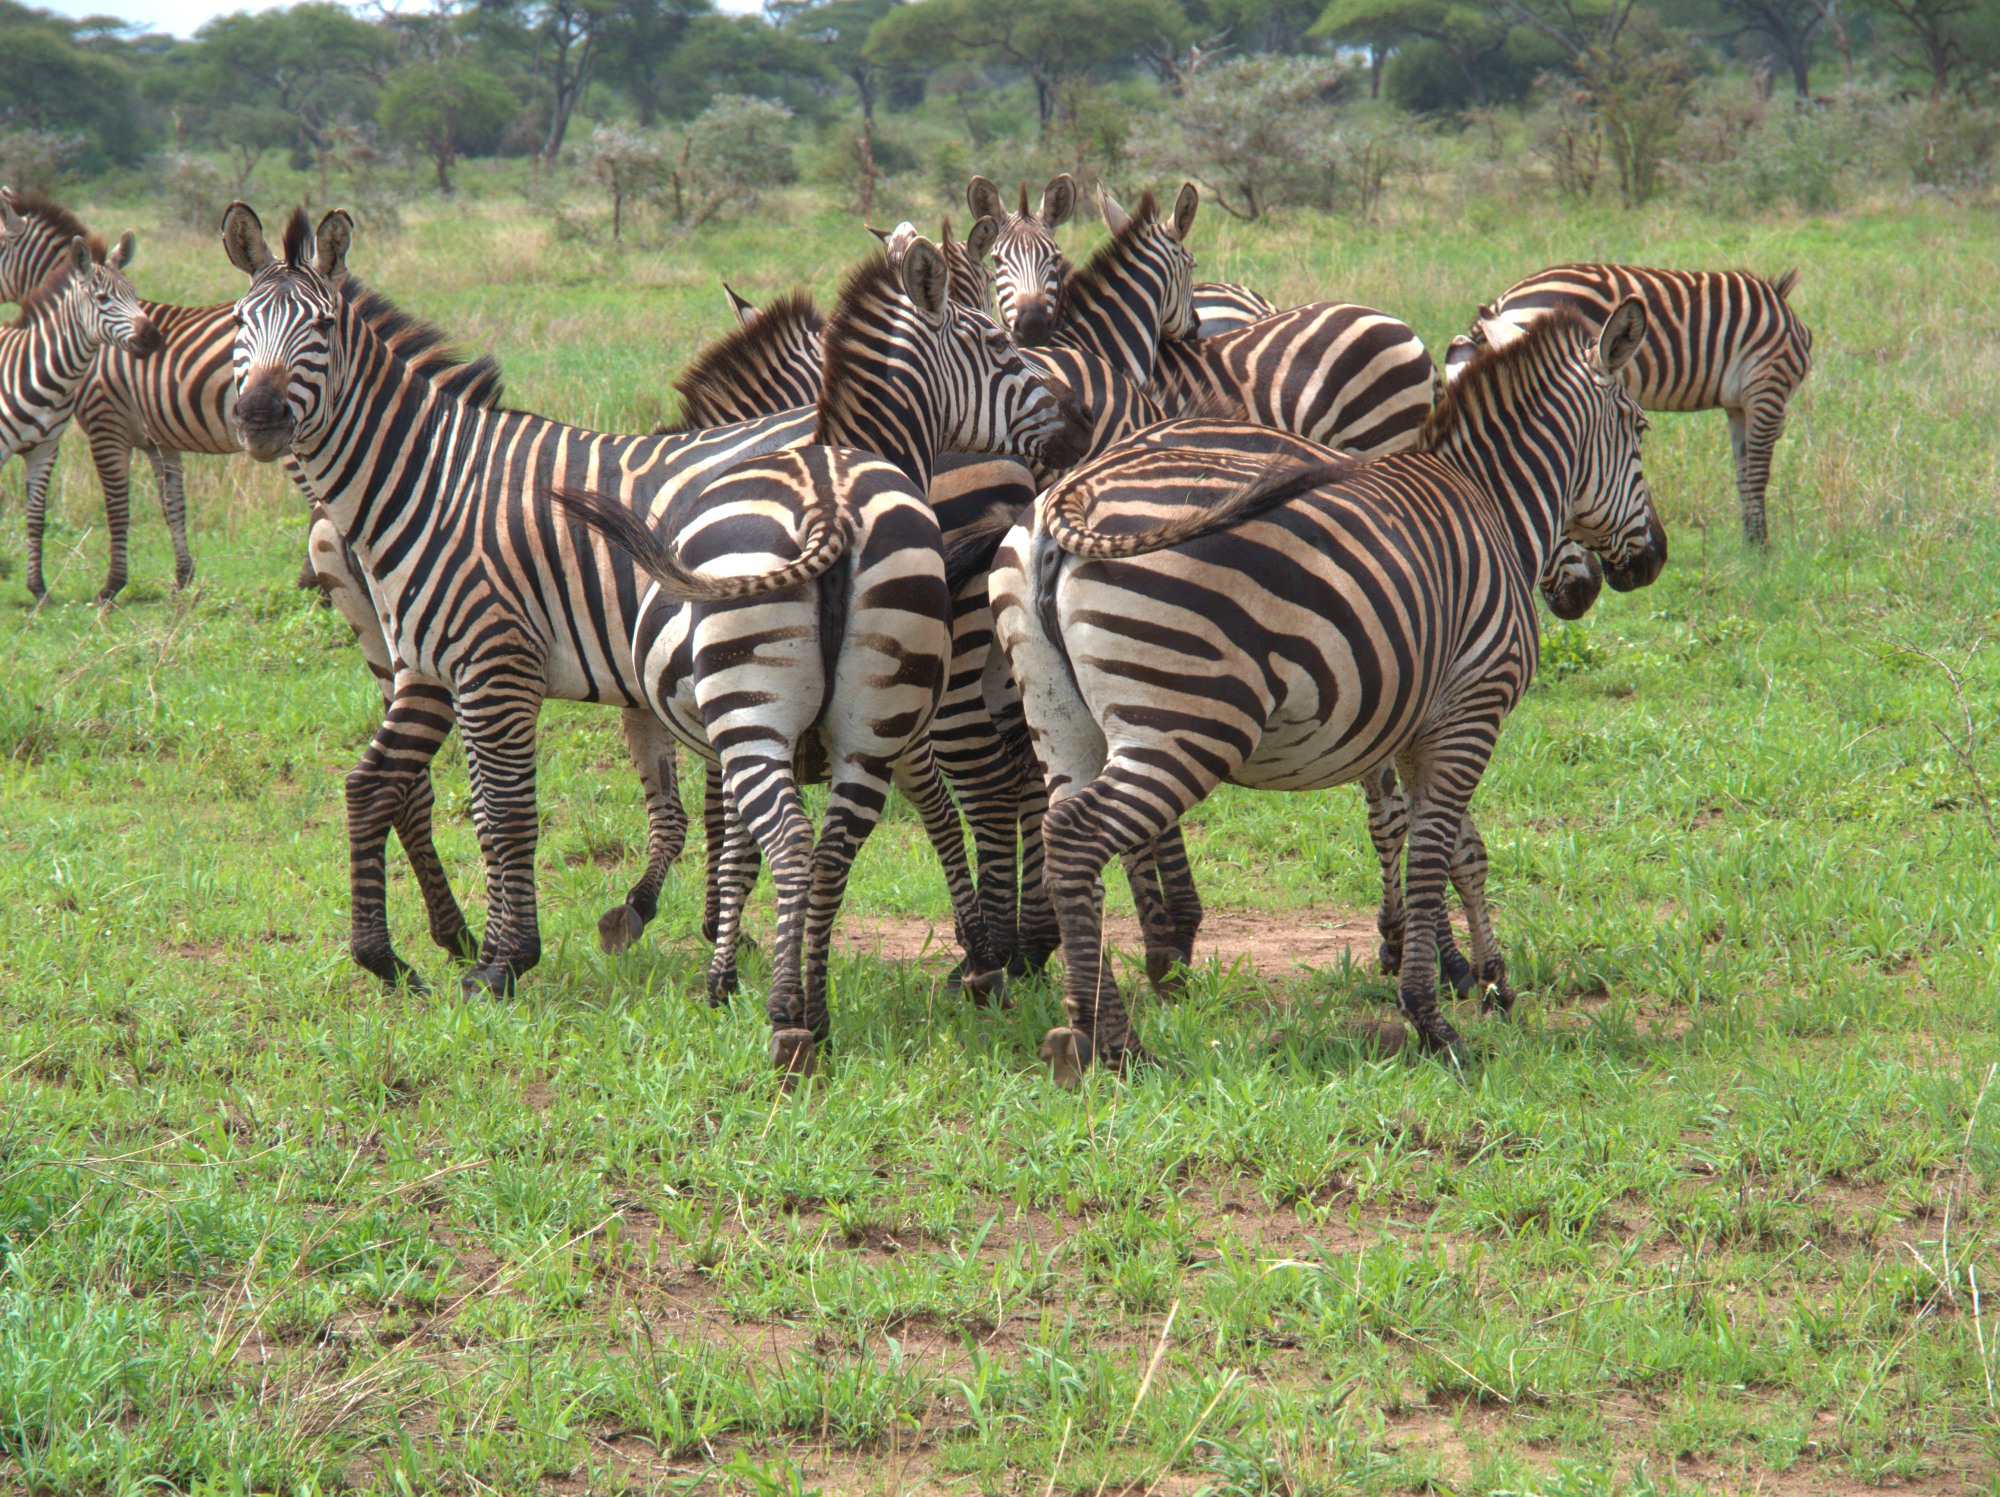 They should call this a kaleidoscope of zebras, not a herd